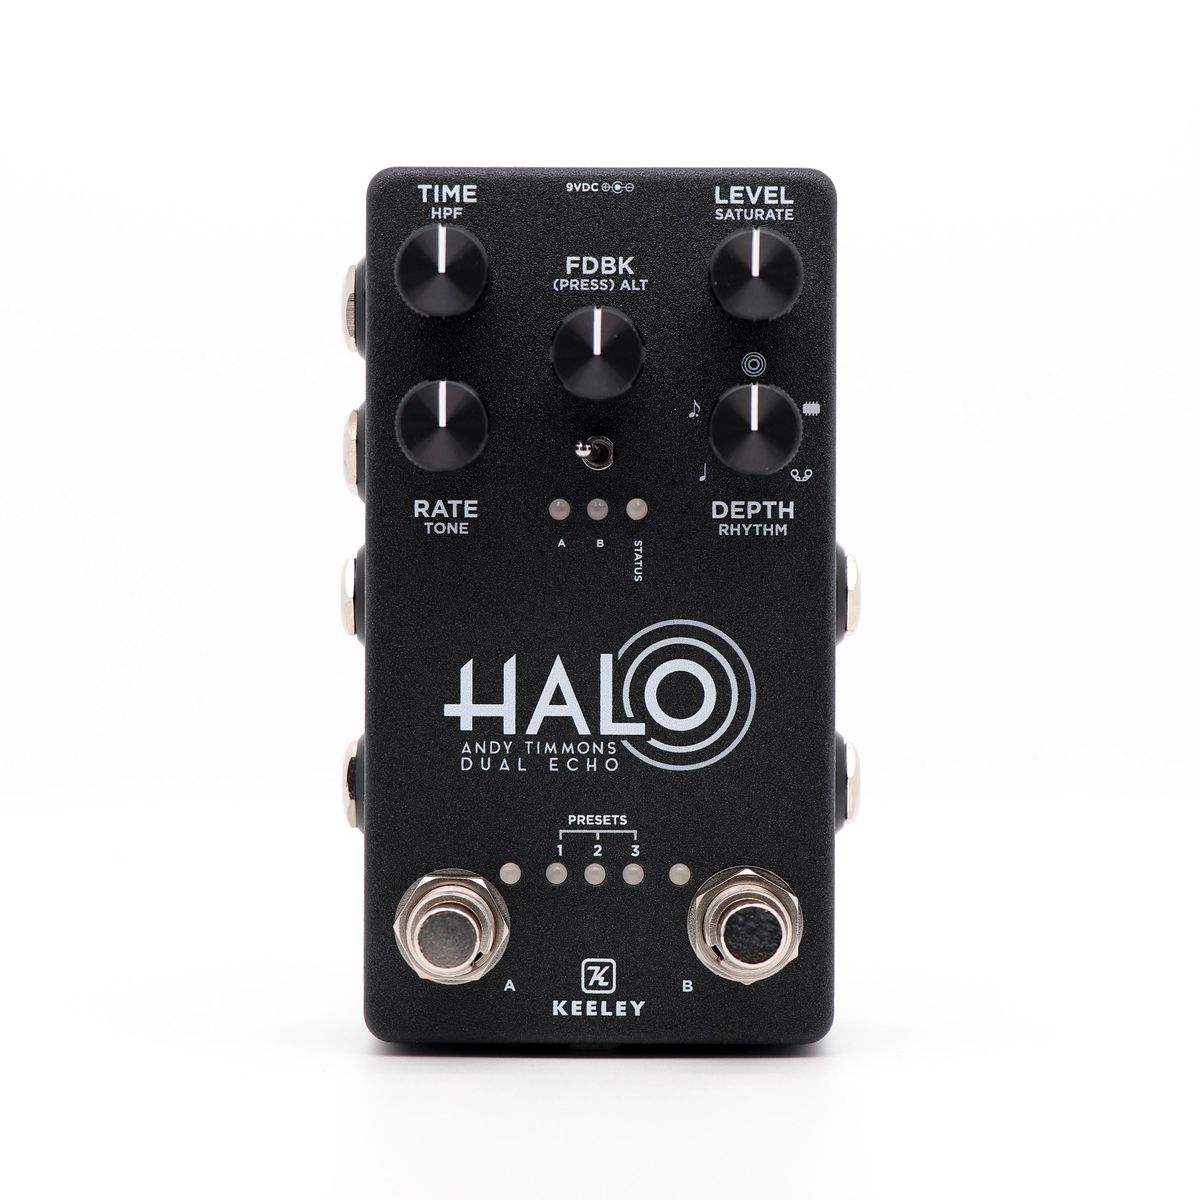 Keeley Electronics Unveils the HALO Andy Timmons Dual Echo